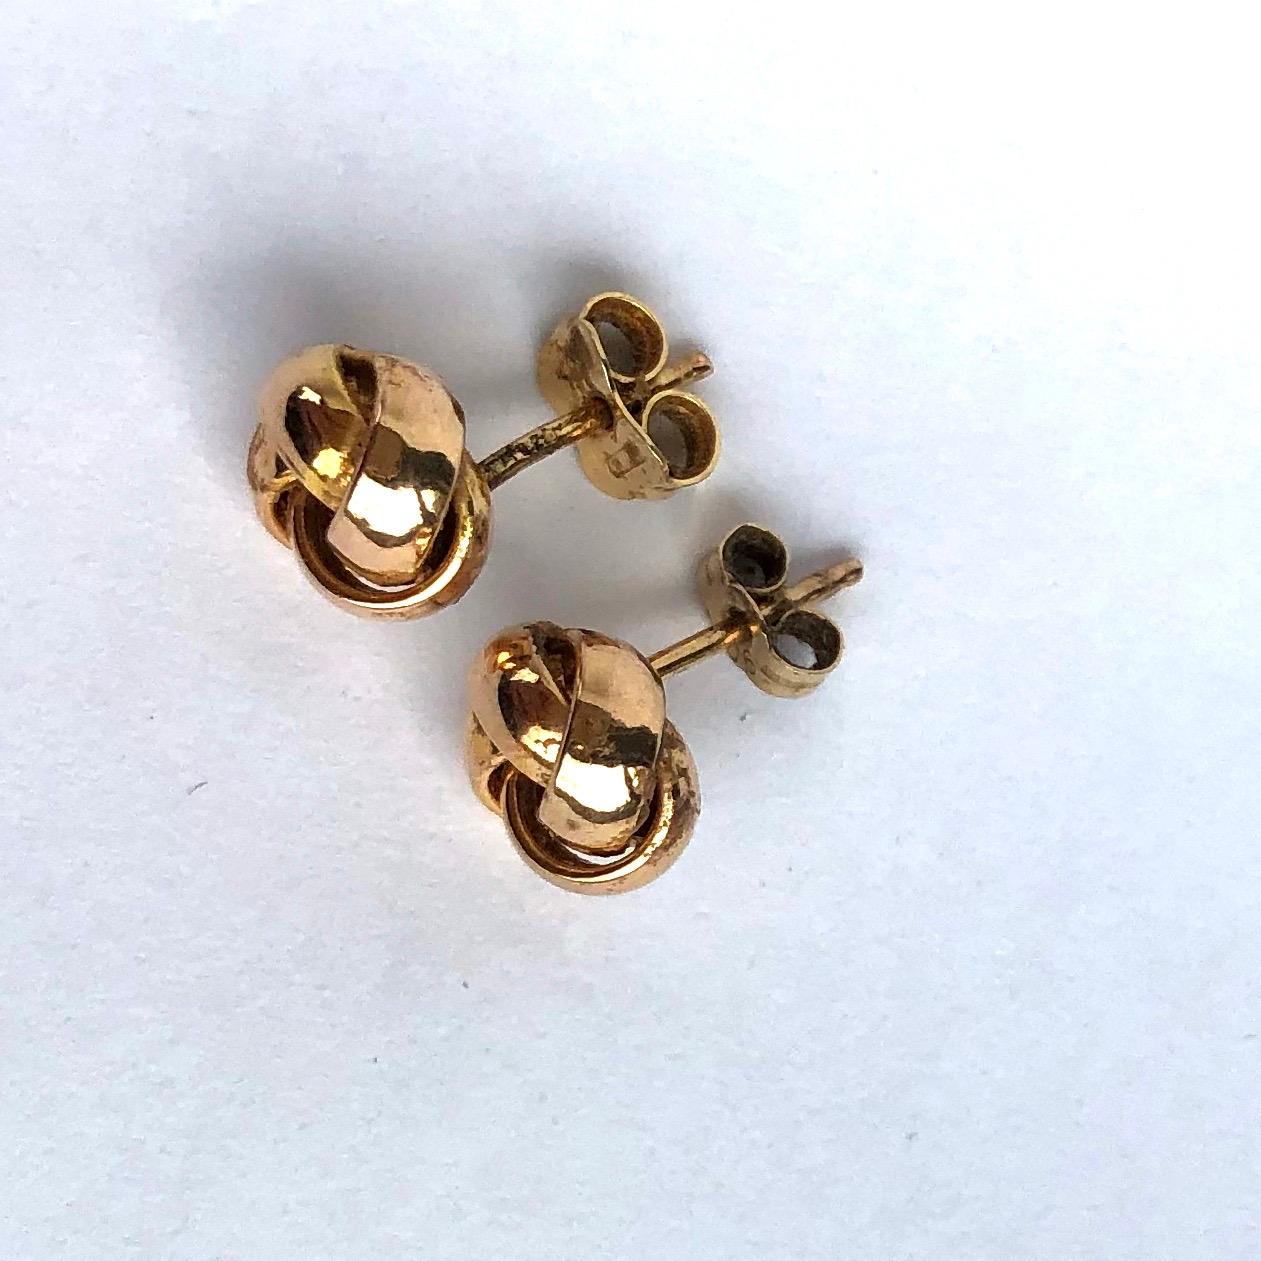 Glossy 9ct yellow gold superbly tied in a knot make the most stylish design for these earrings. The layered hoops have a wonderful sheen to them and make perfect studs.

Knot Diameter: 9mm
Height From Ear: 5mm

Weight: 1.2g